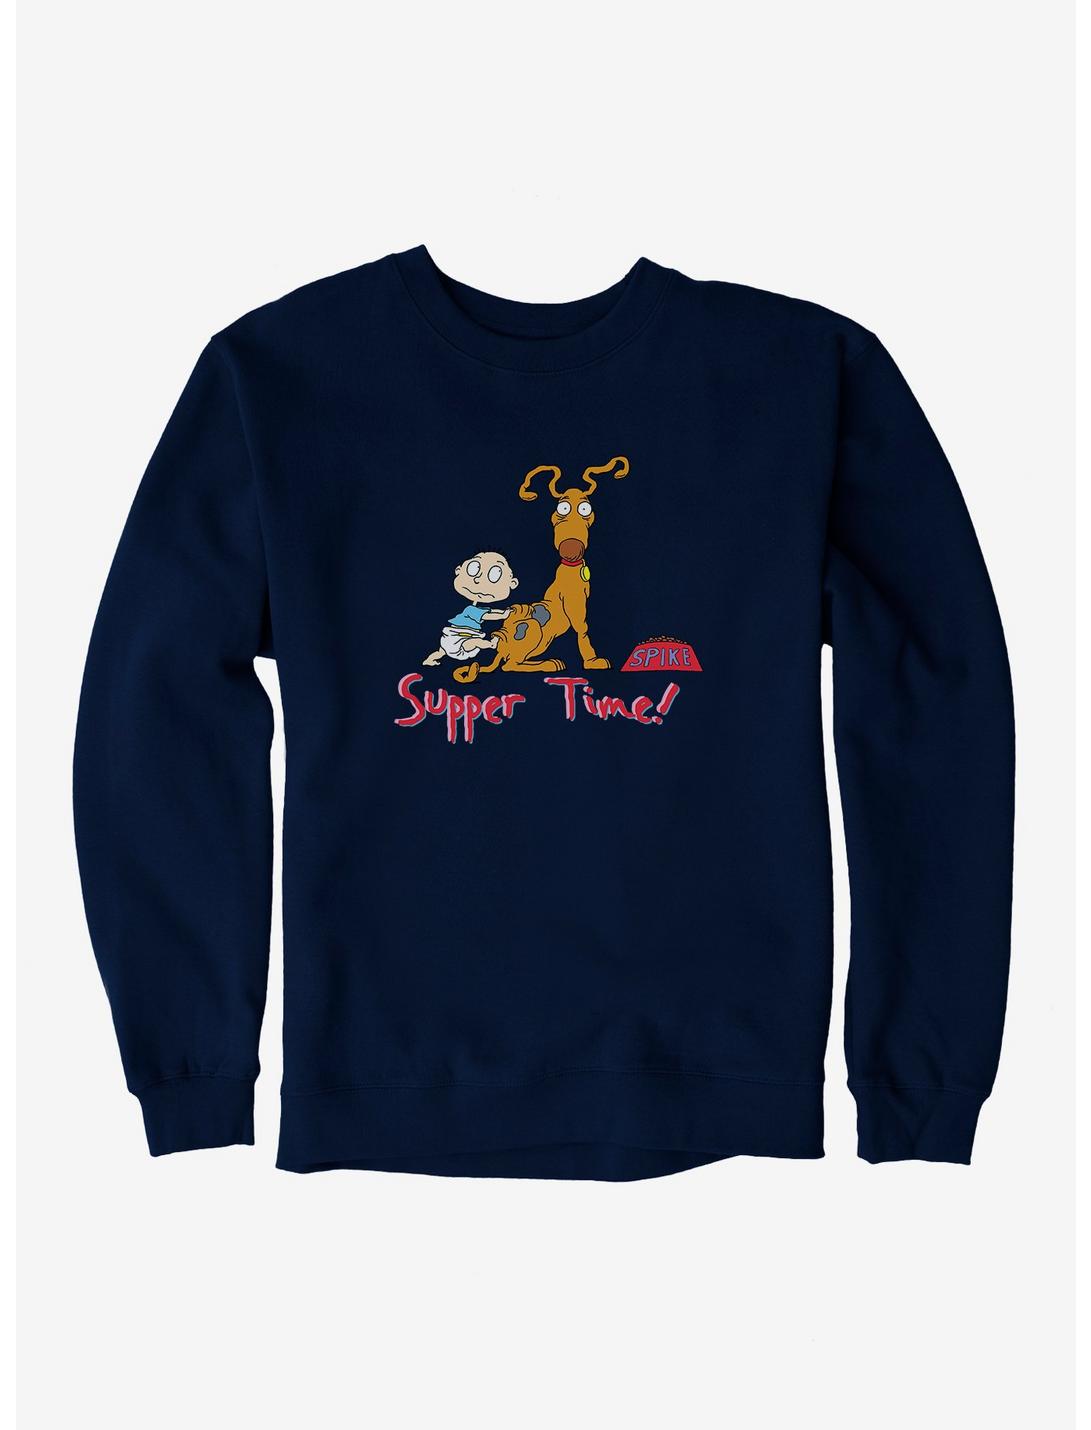 Rugrats Spike And Tommy Supper Time! Sweatshirt, NAVY, hi-res